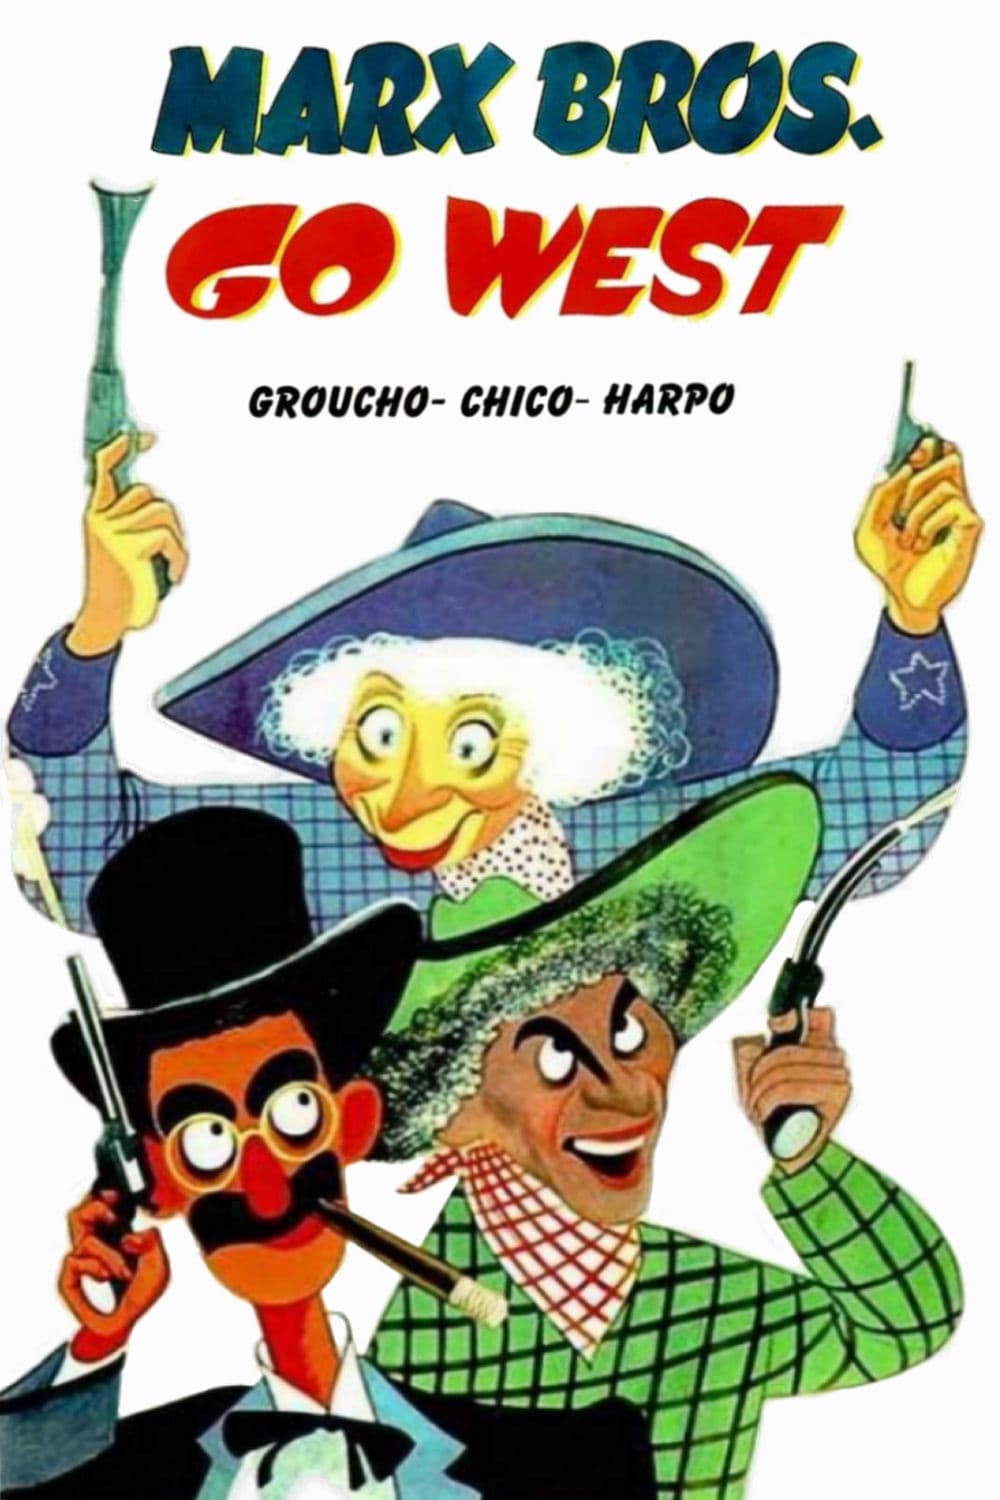 Poster for the movie "Go West"